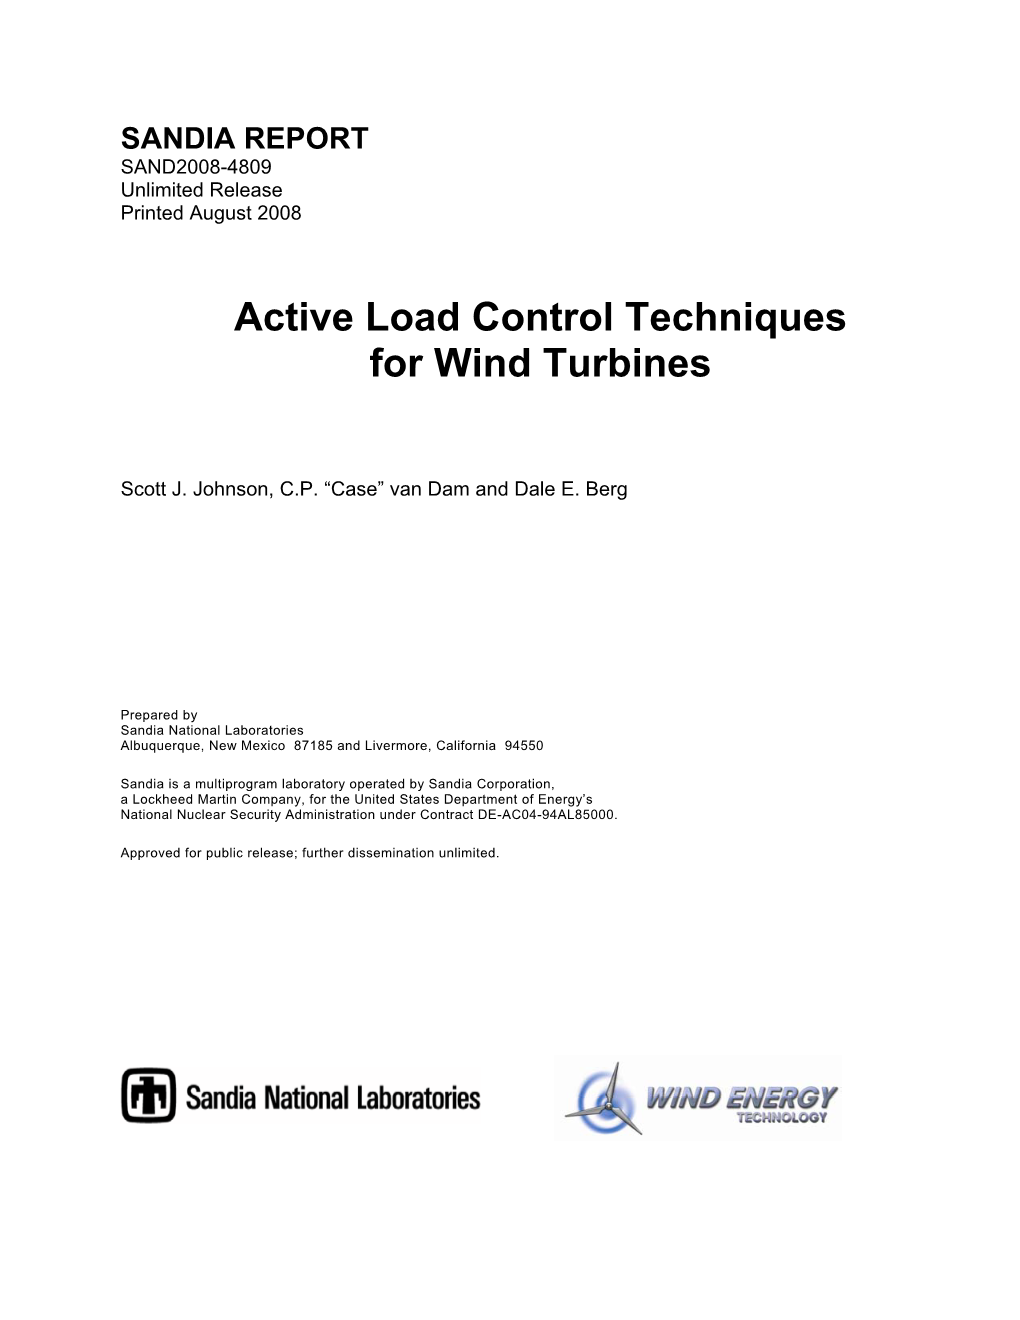 Active Load Control Techniques for Wind Turbines